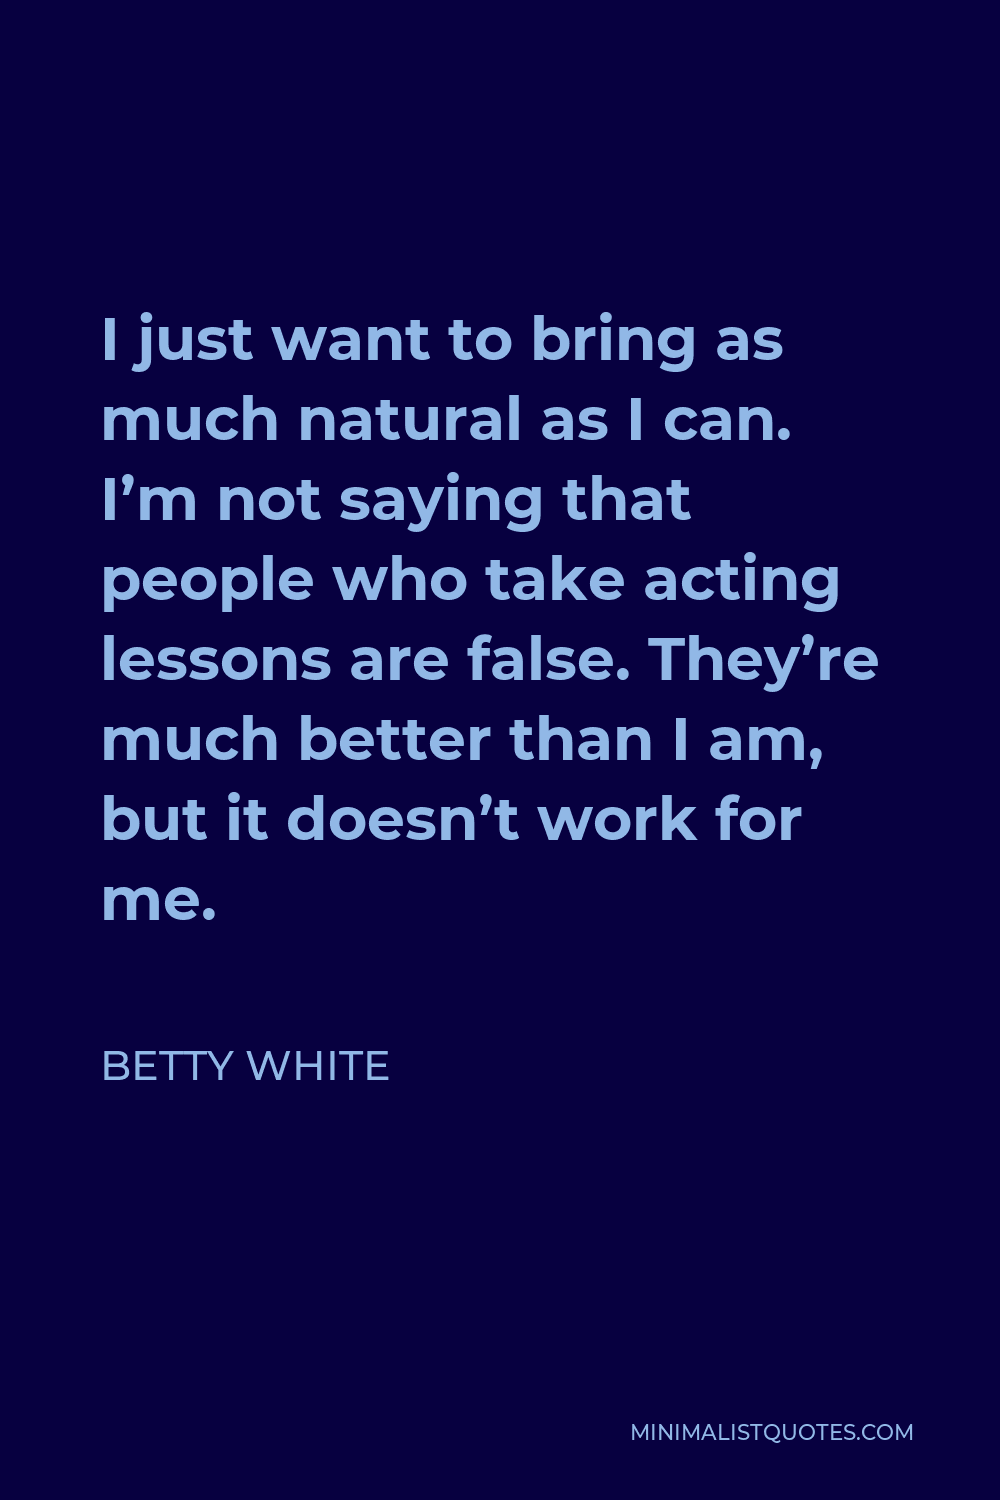 Betty White Quote - I just want to bring as much natural as I can. I’m not saying that people who take acting lessons are false. They’re much better than I am, but it doesn’t work for me.